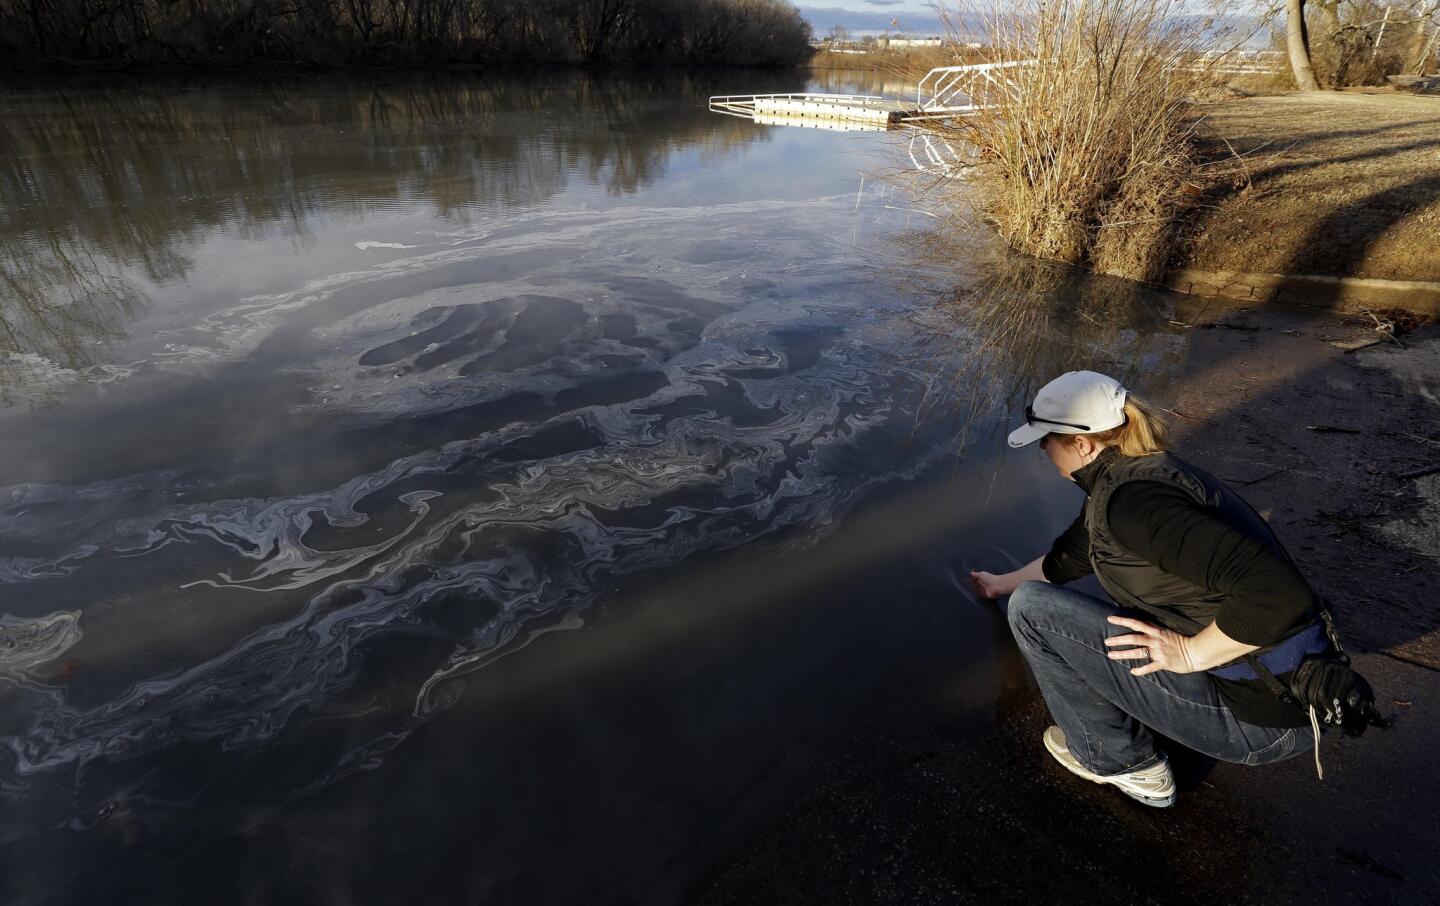 Amy Adams, North Carolina campaign coordinator with Appalachian Voices, dips her hand into the Dan River in Danville, Va., on Feb. 5 as signs of coal ash appear in the river. Duke Energy estimates that up to 82,000 tons of ash have been released from a break in a 48-inch storm water pipe at the Dan River Power Plant in Eden, N.C.